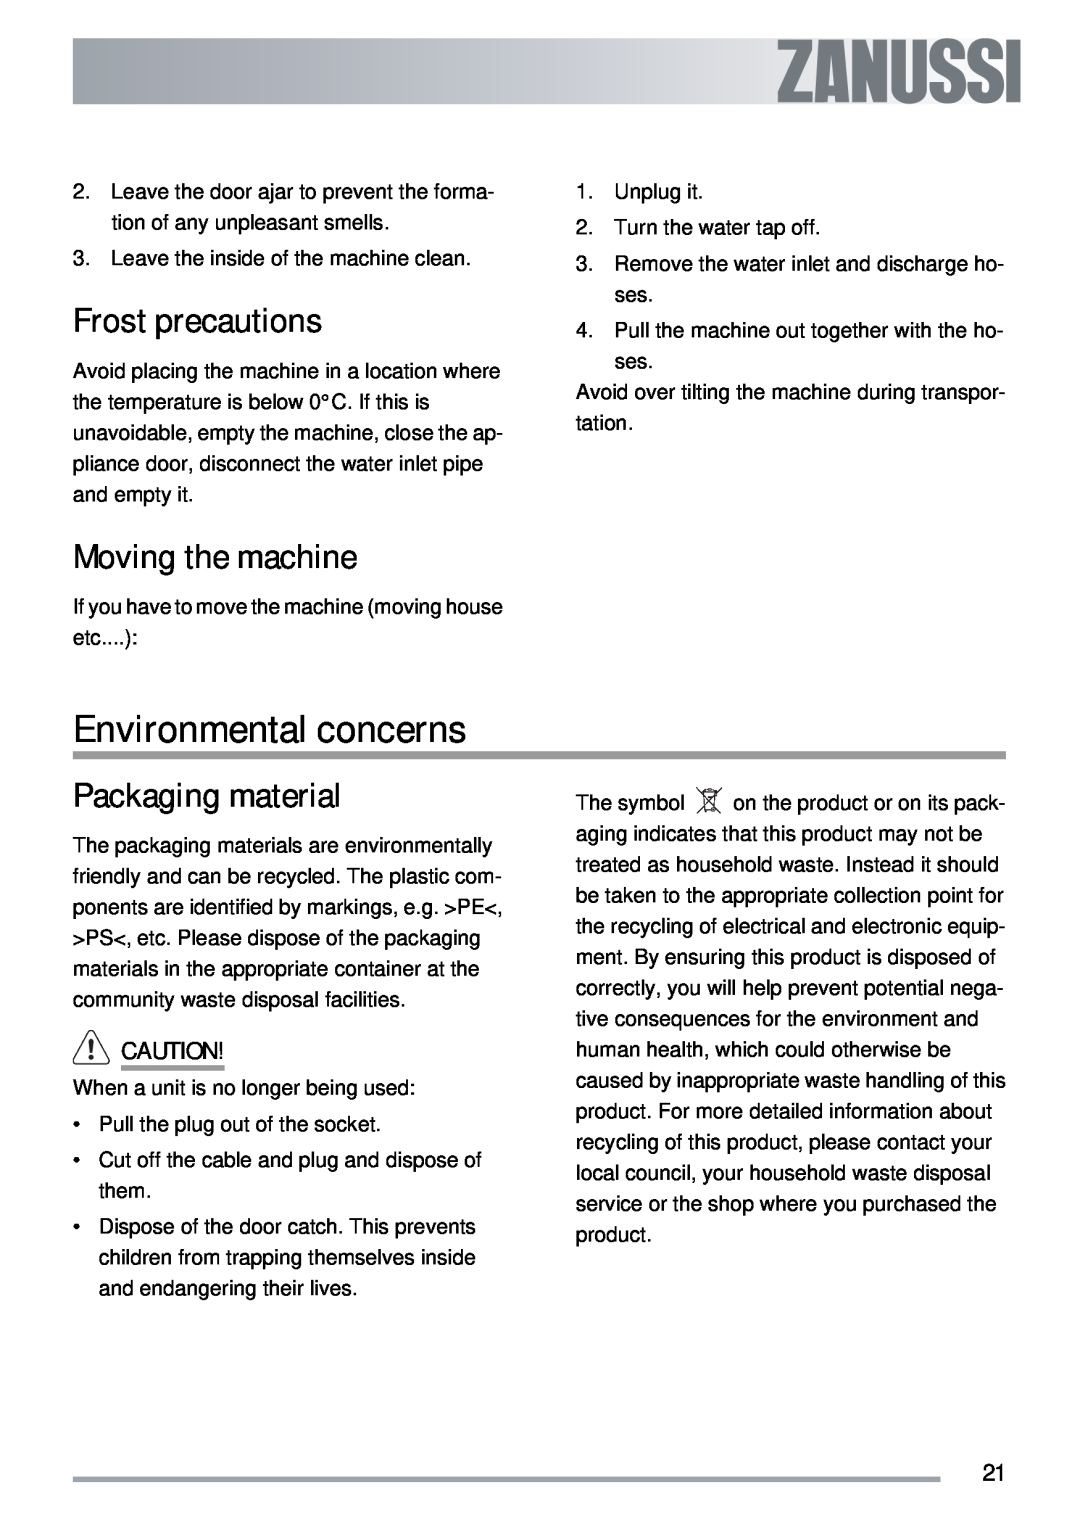 Zanussi ZDT 311 user manual Environmental concerns, Frost precautions, Moving the machine, Packaging material 